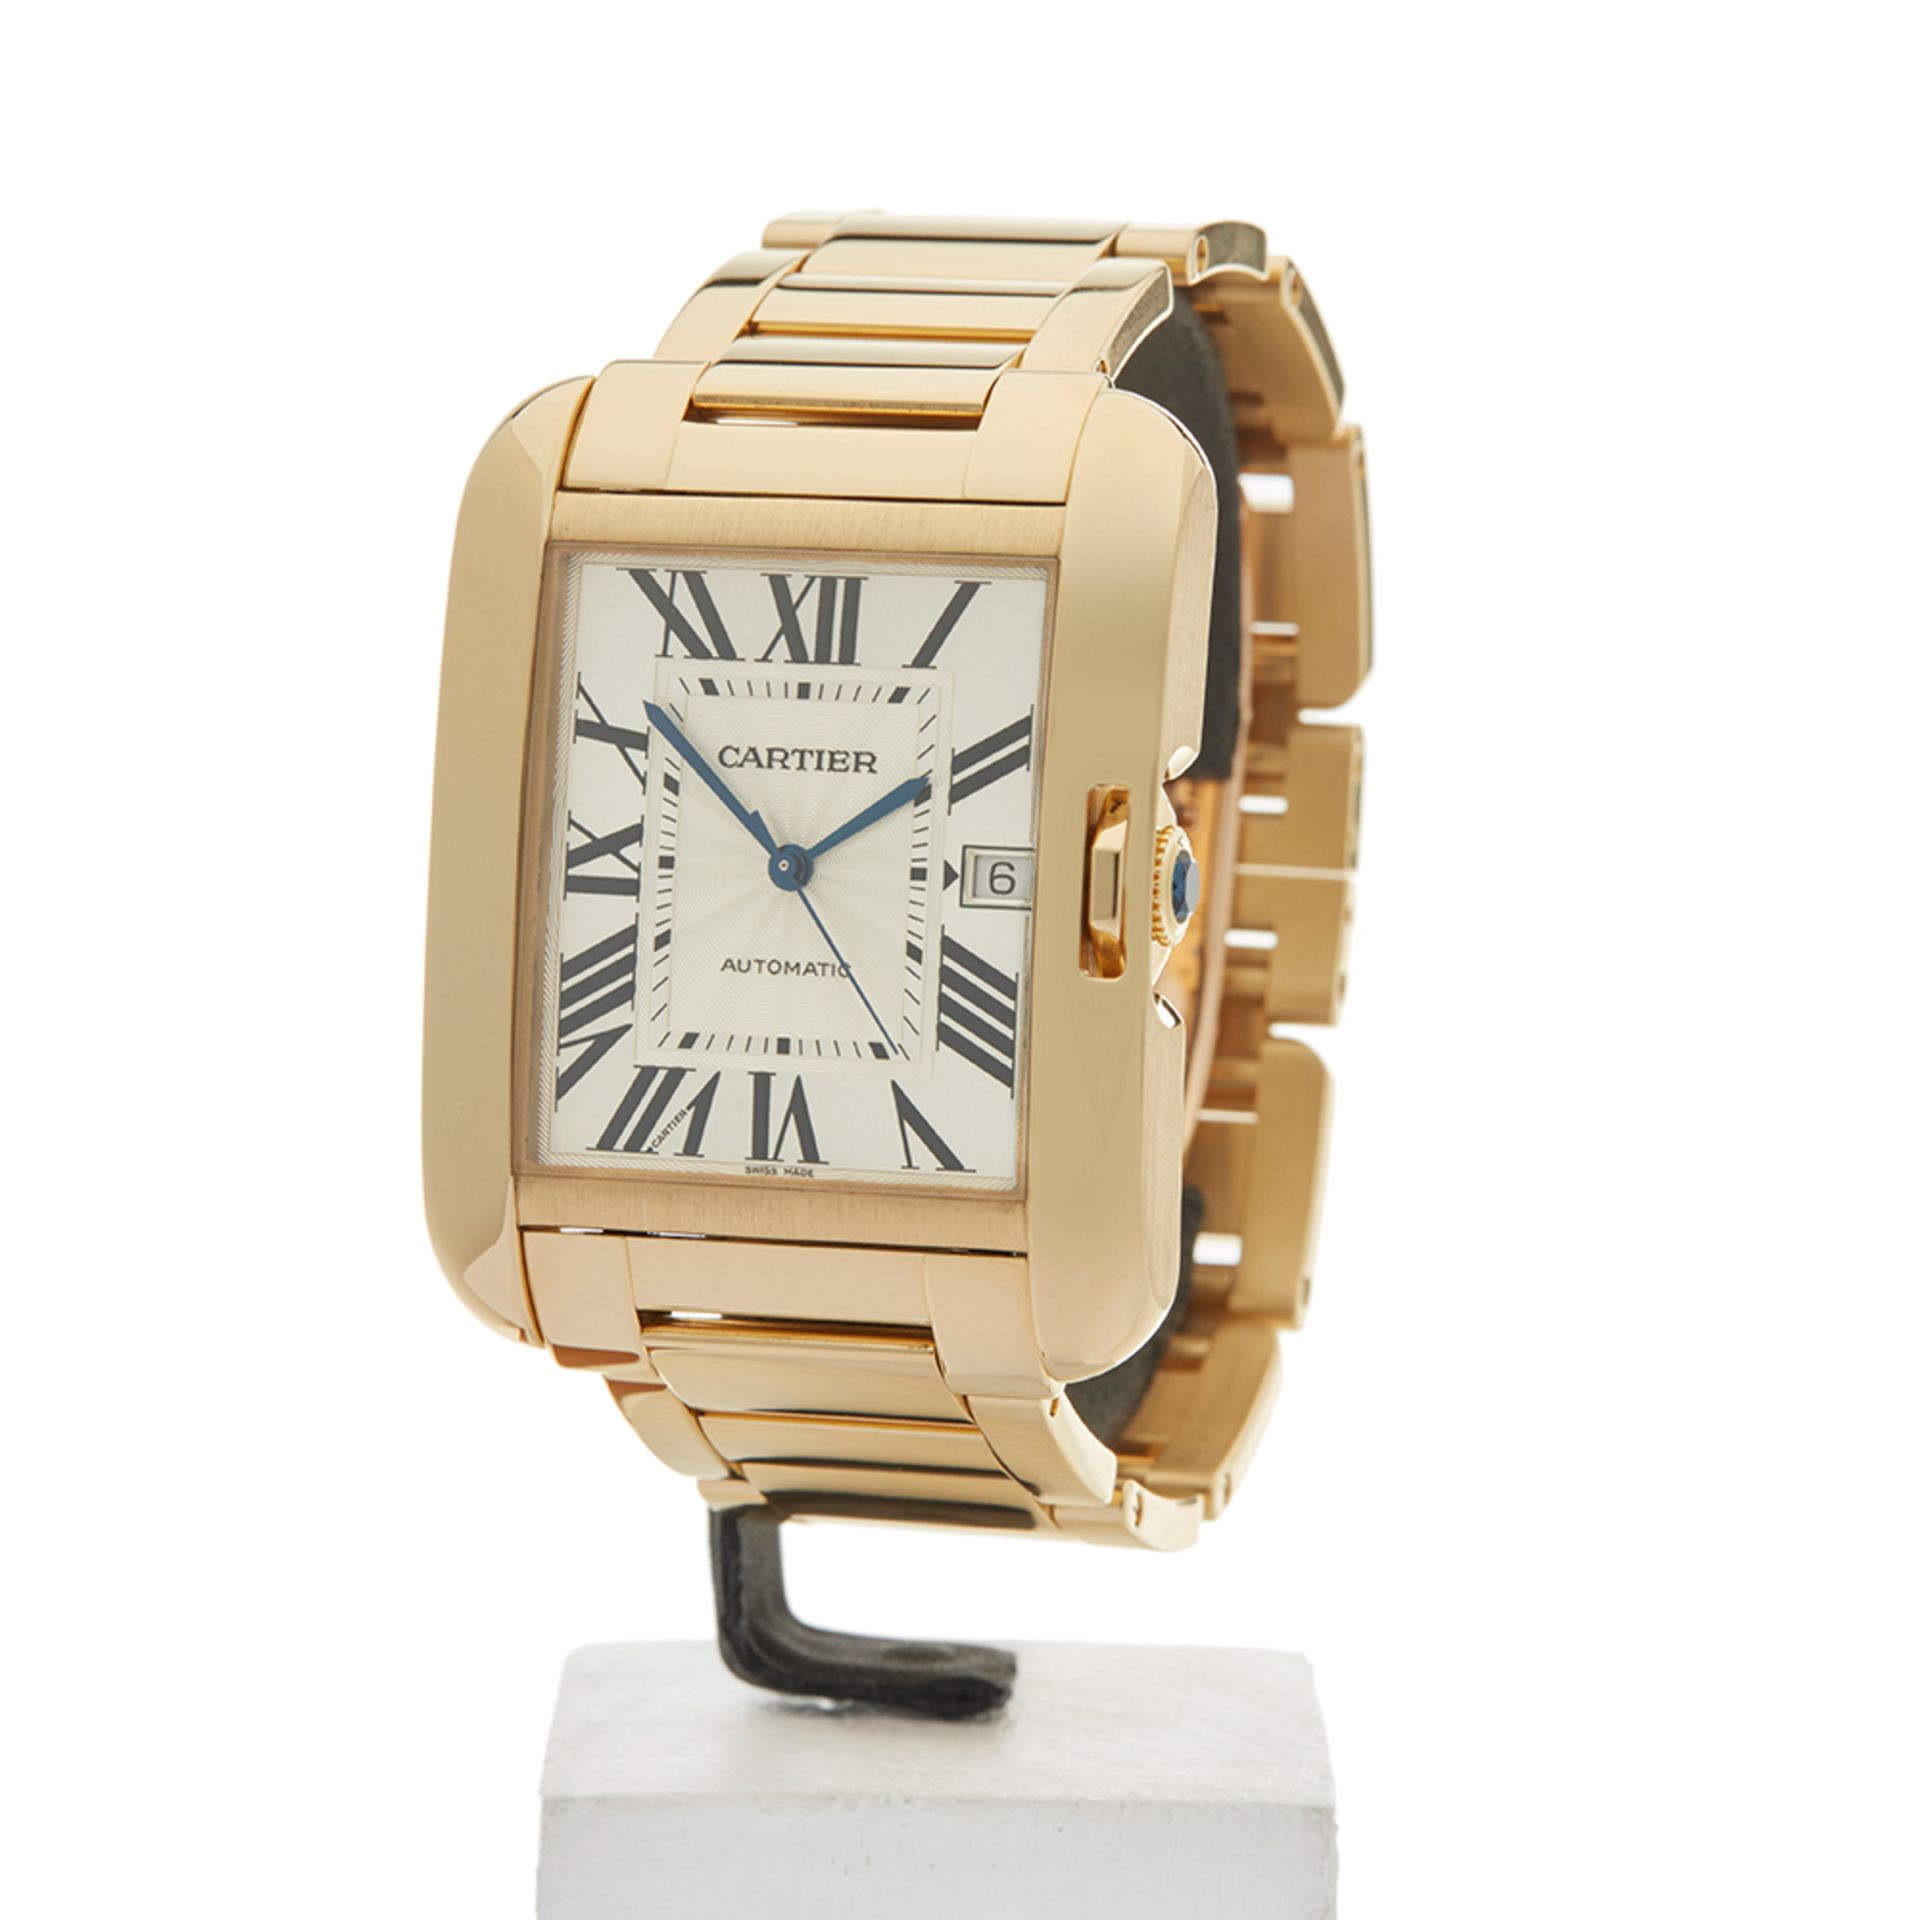 Cartier Tank Anglaise 37mm 18k Yellow Gold - 3505 or W5310018 - Image 3 of 8